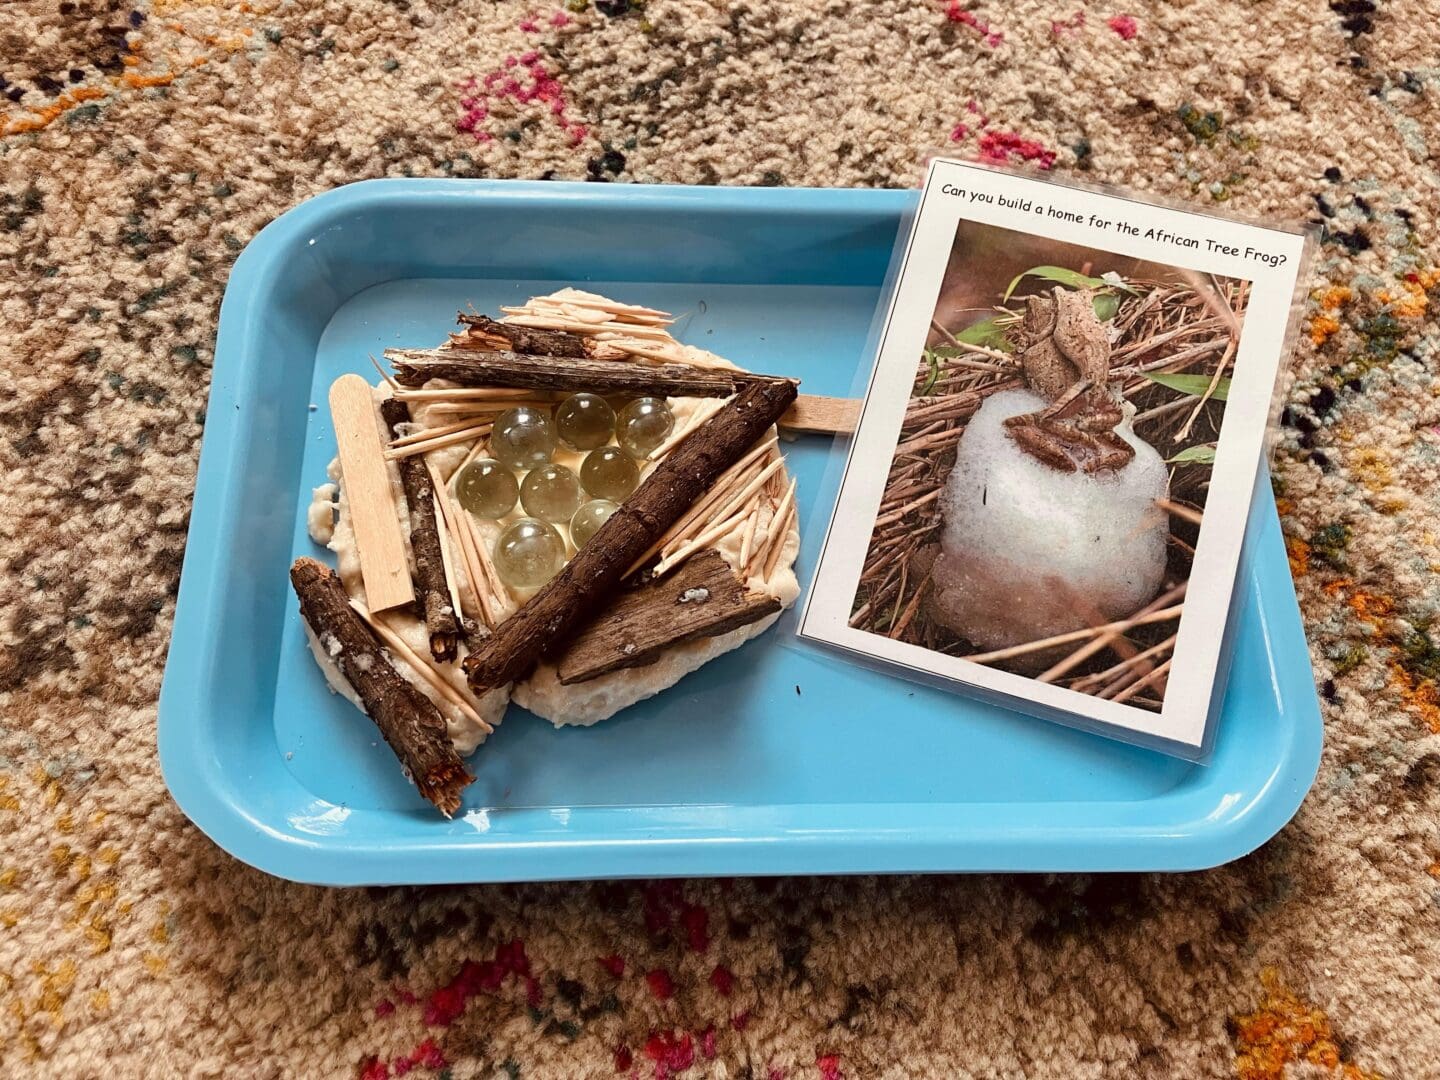 A blue tray with some food and a card